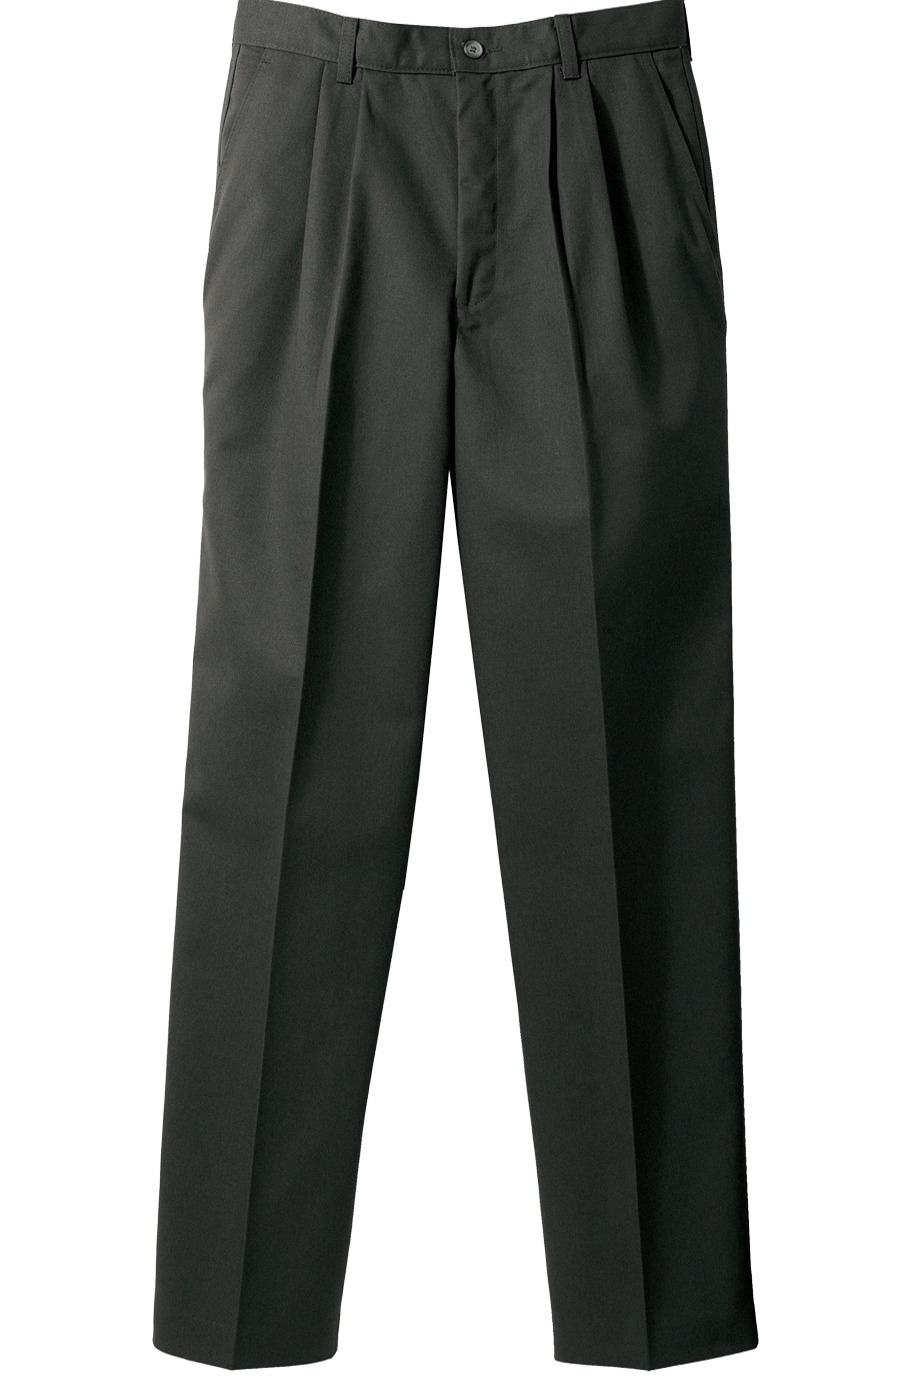 Edward's Men's Pleated Front Blended Chino Pants